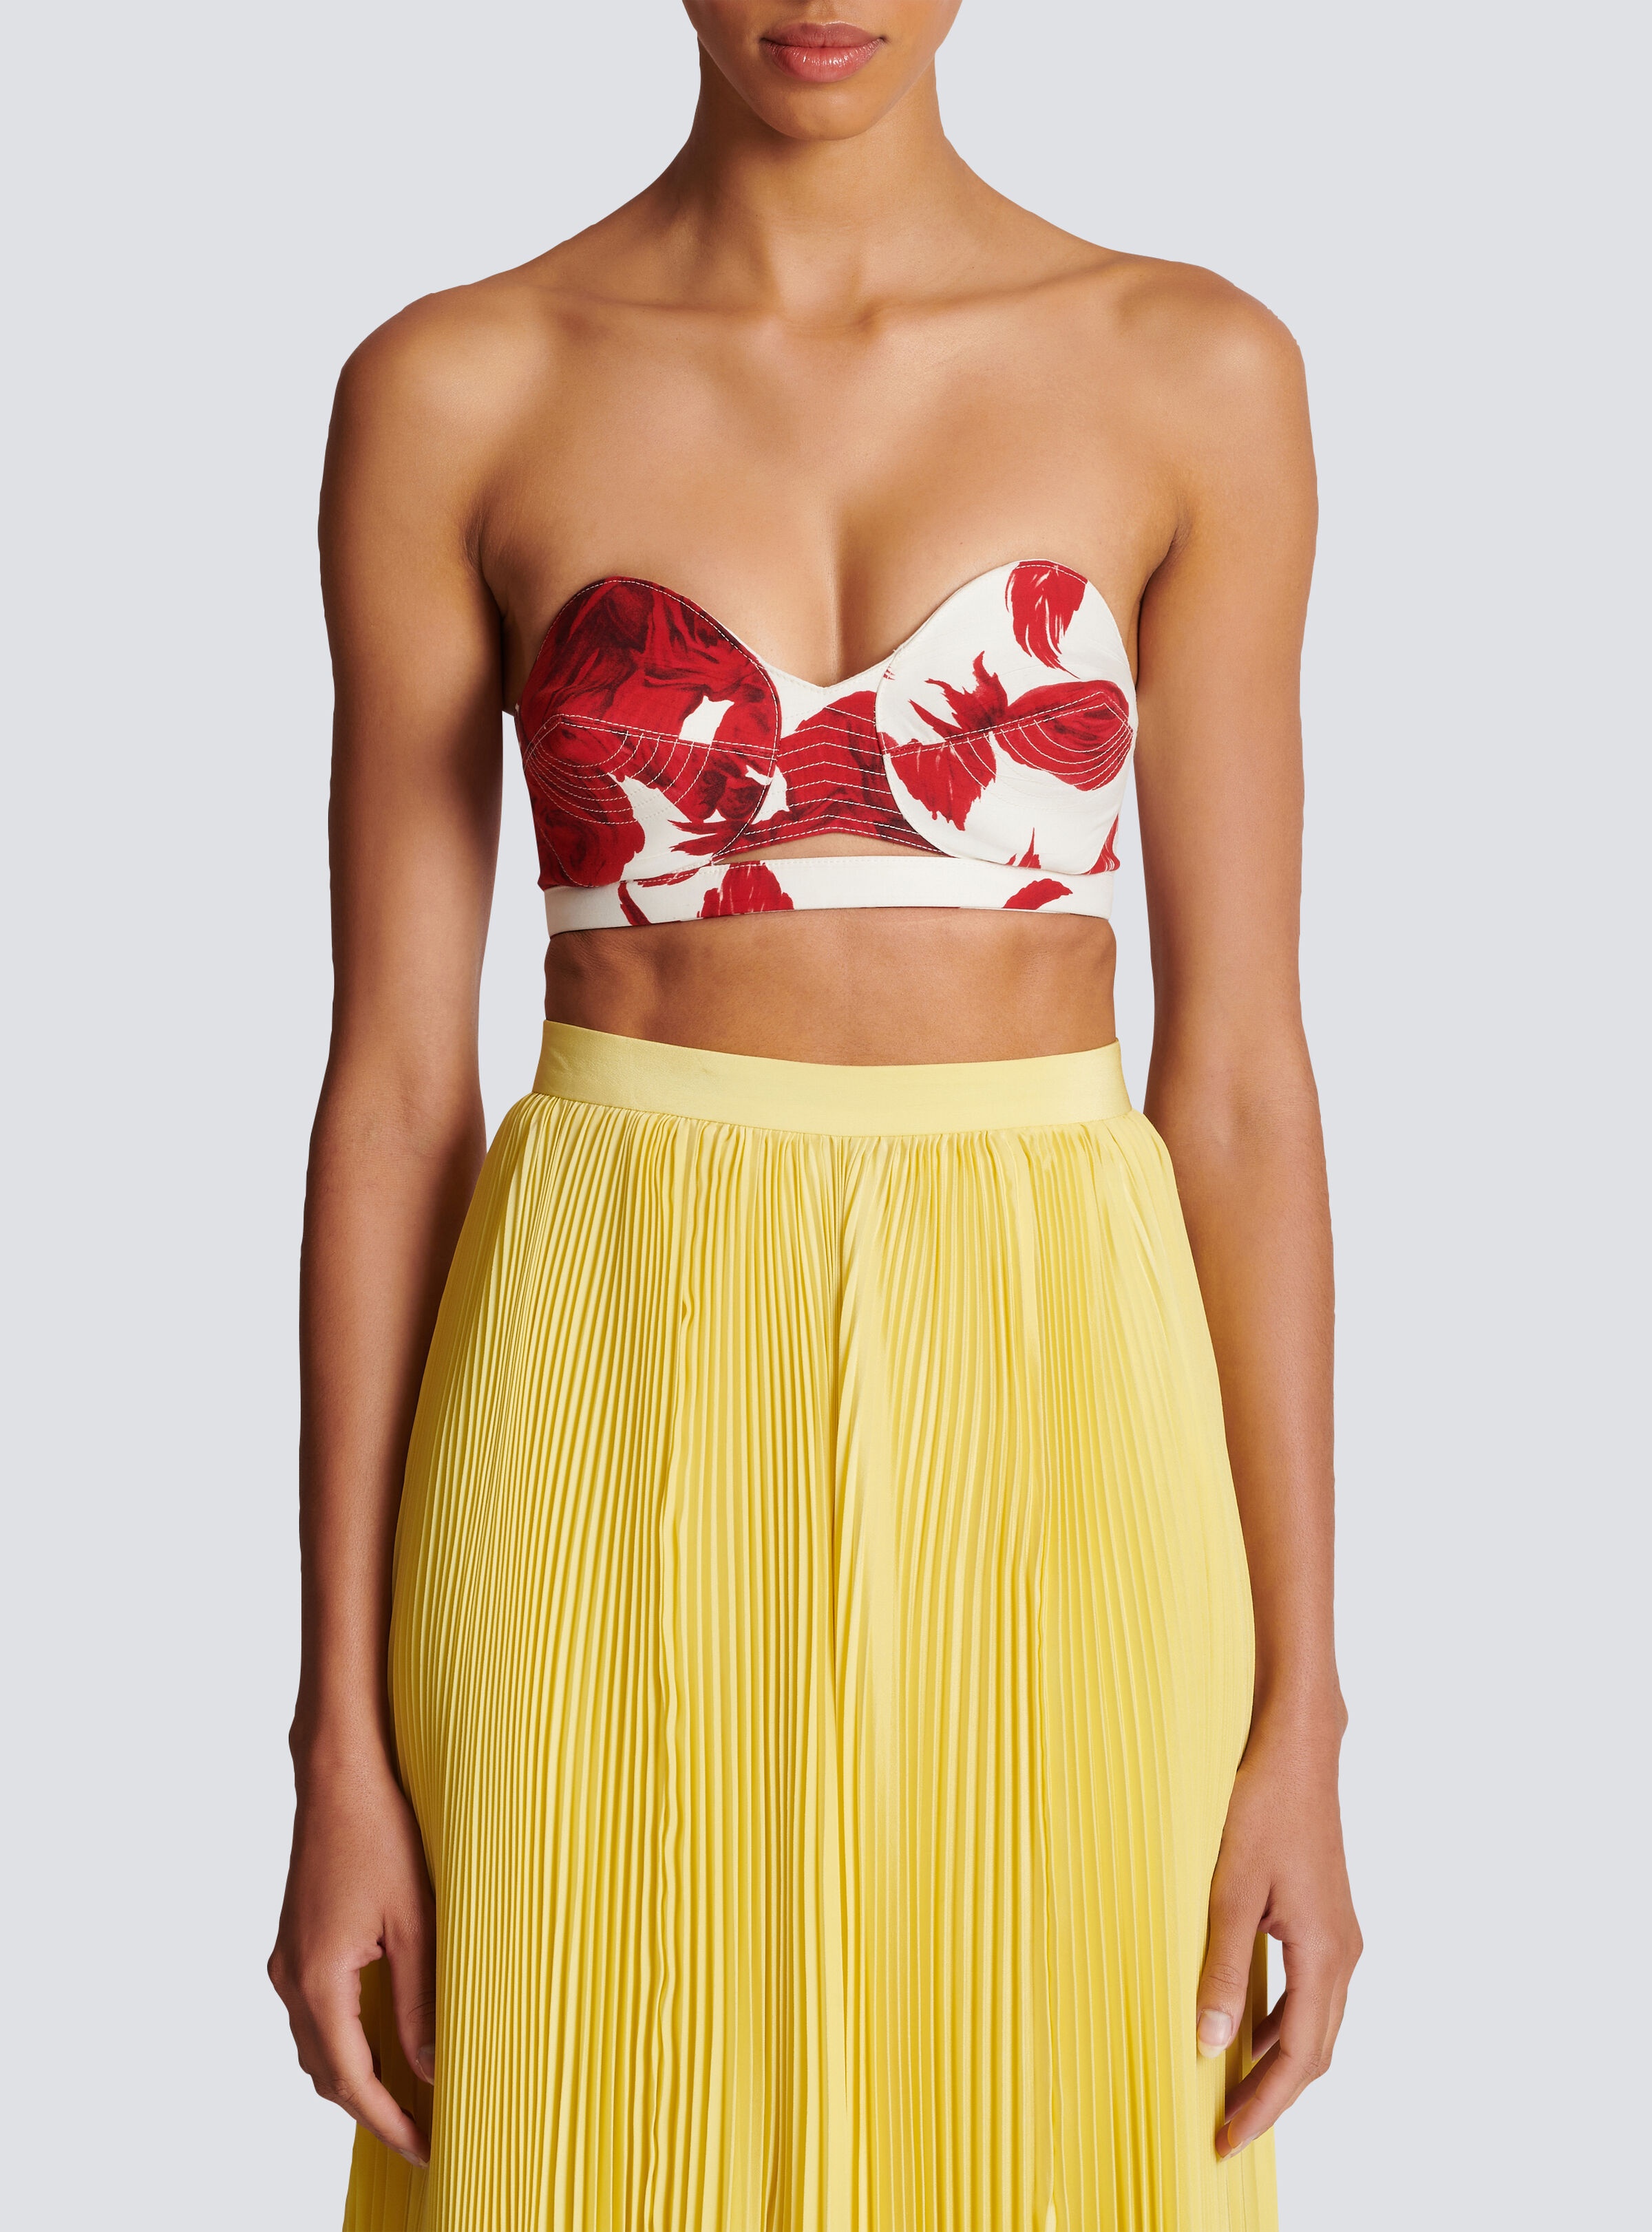 Strapless crop top with Red Roses print - 5